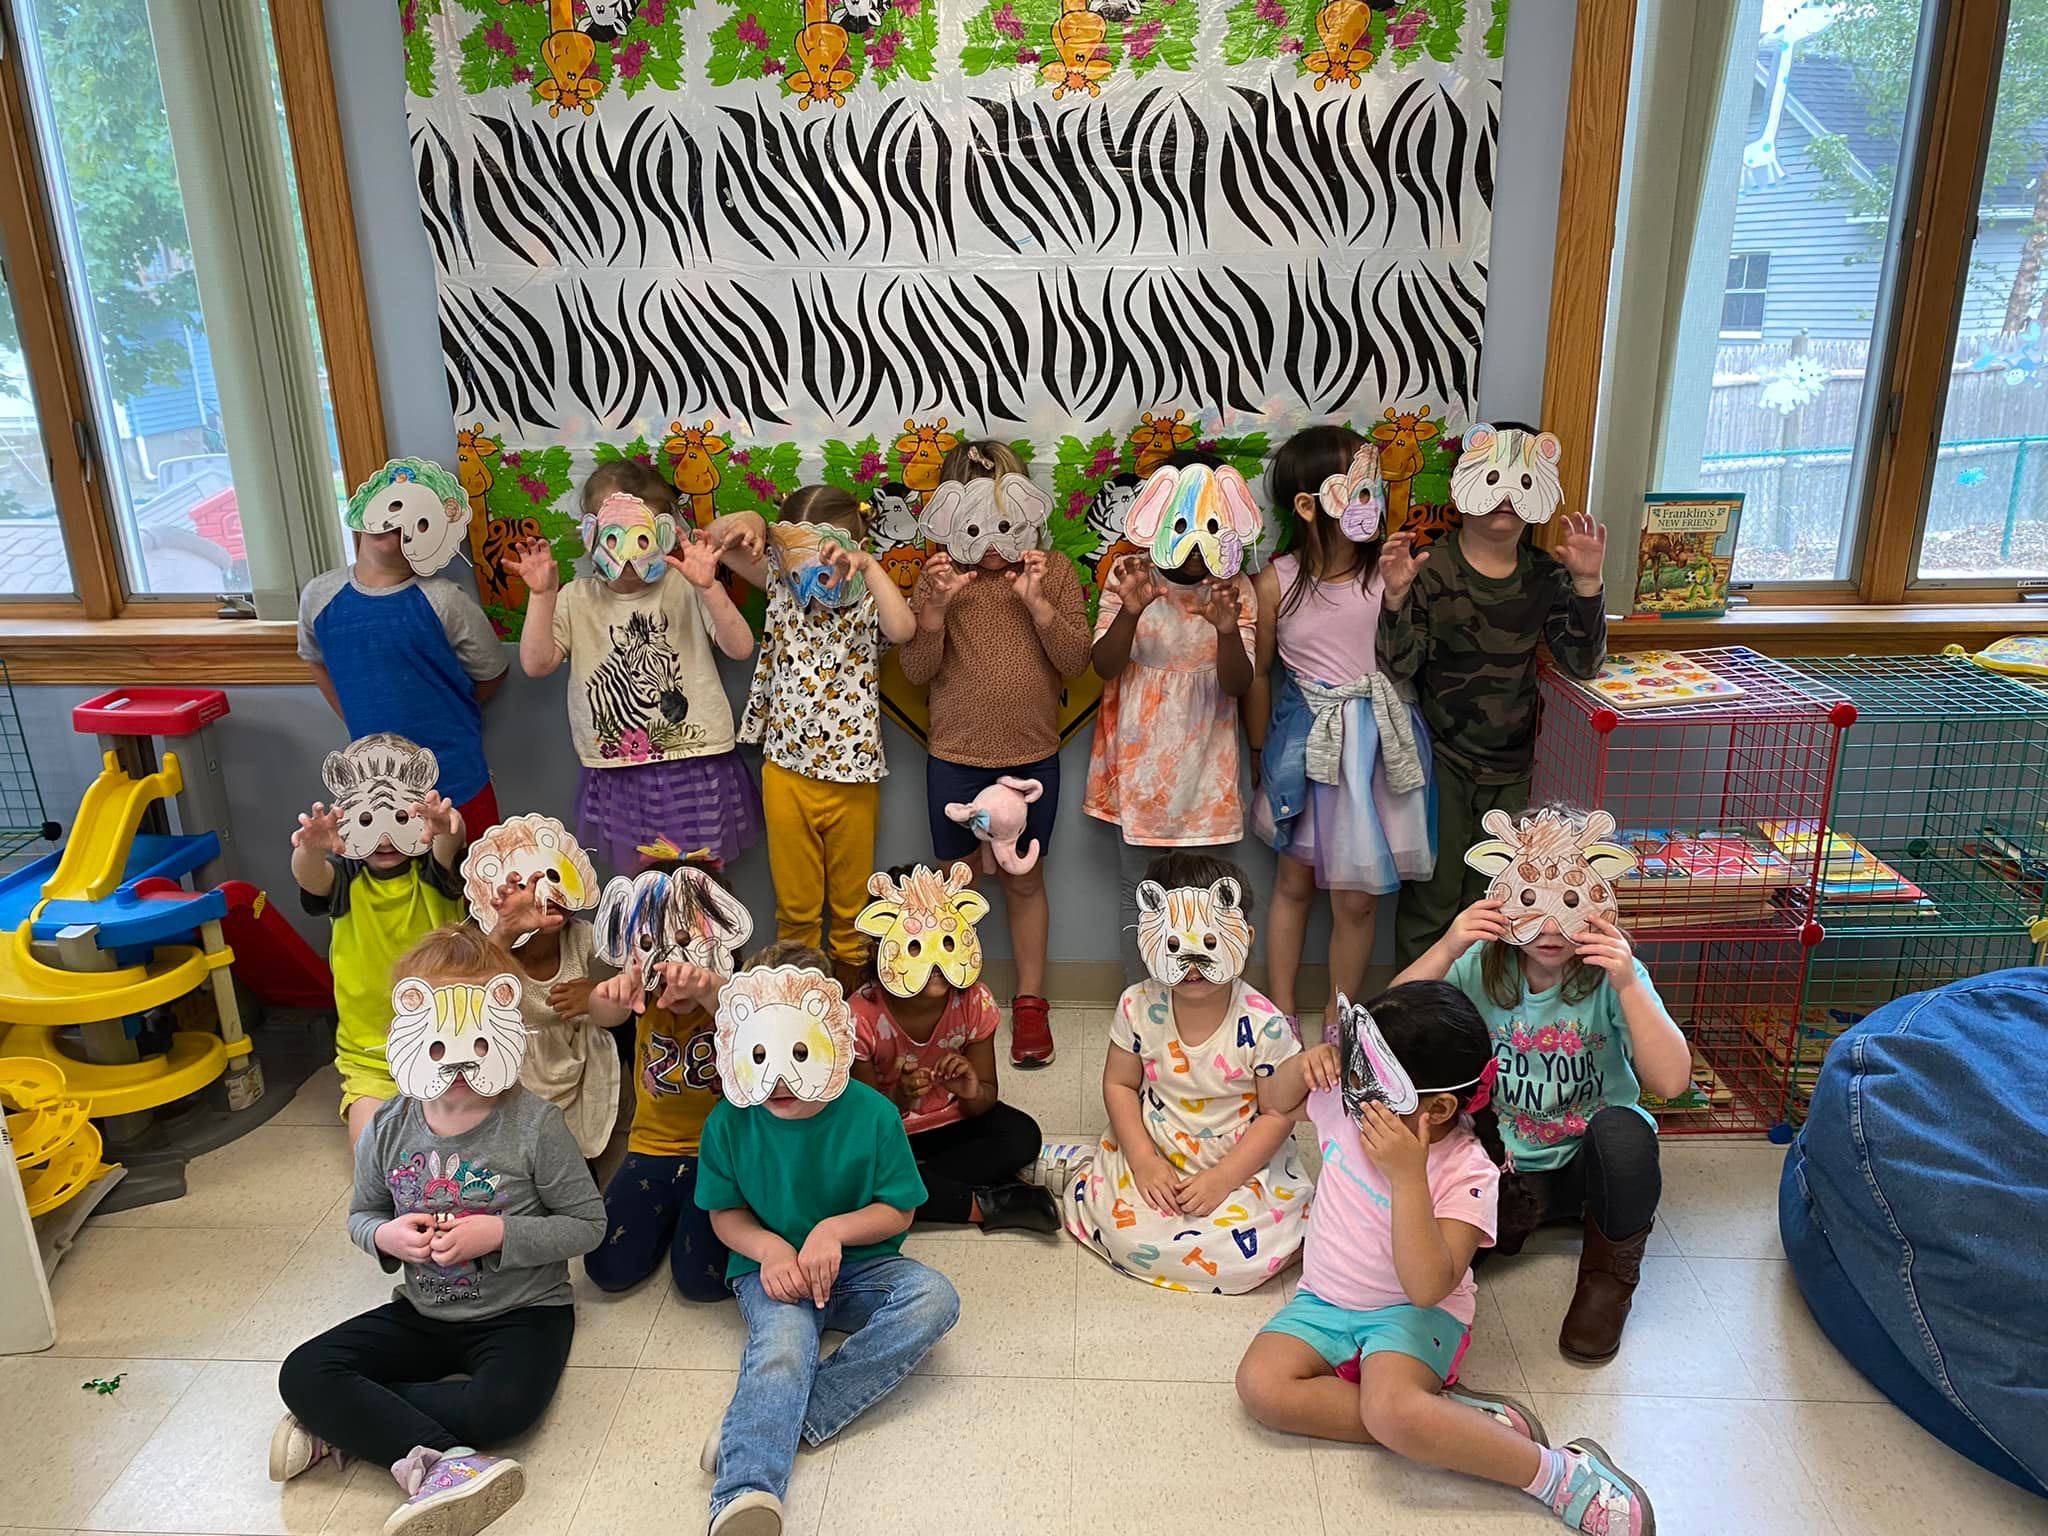 Children showing their lion masks which they colored.